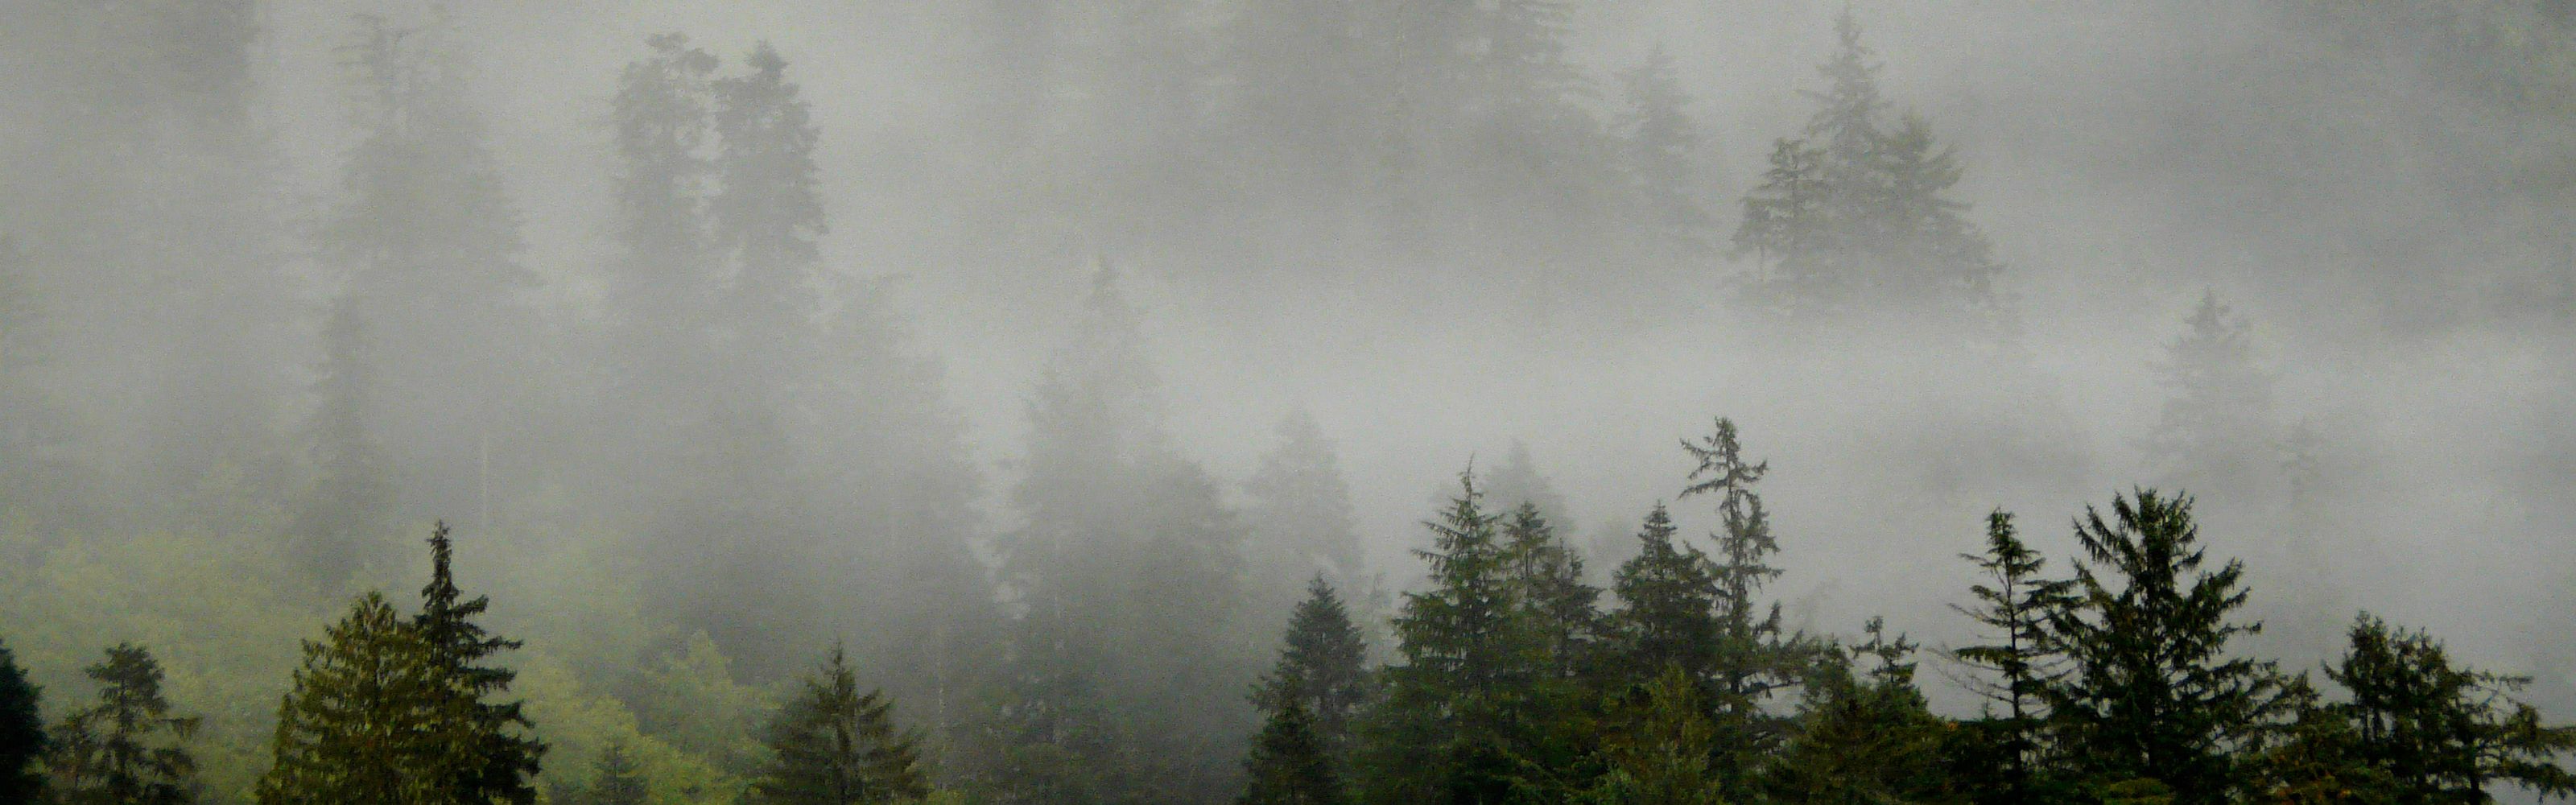 Fog and rain shrouds the Pacific coastline of the Great Bear Rainforest in Canada.